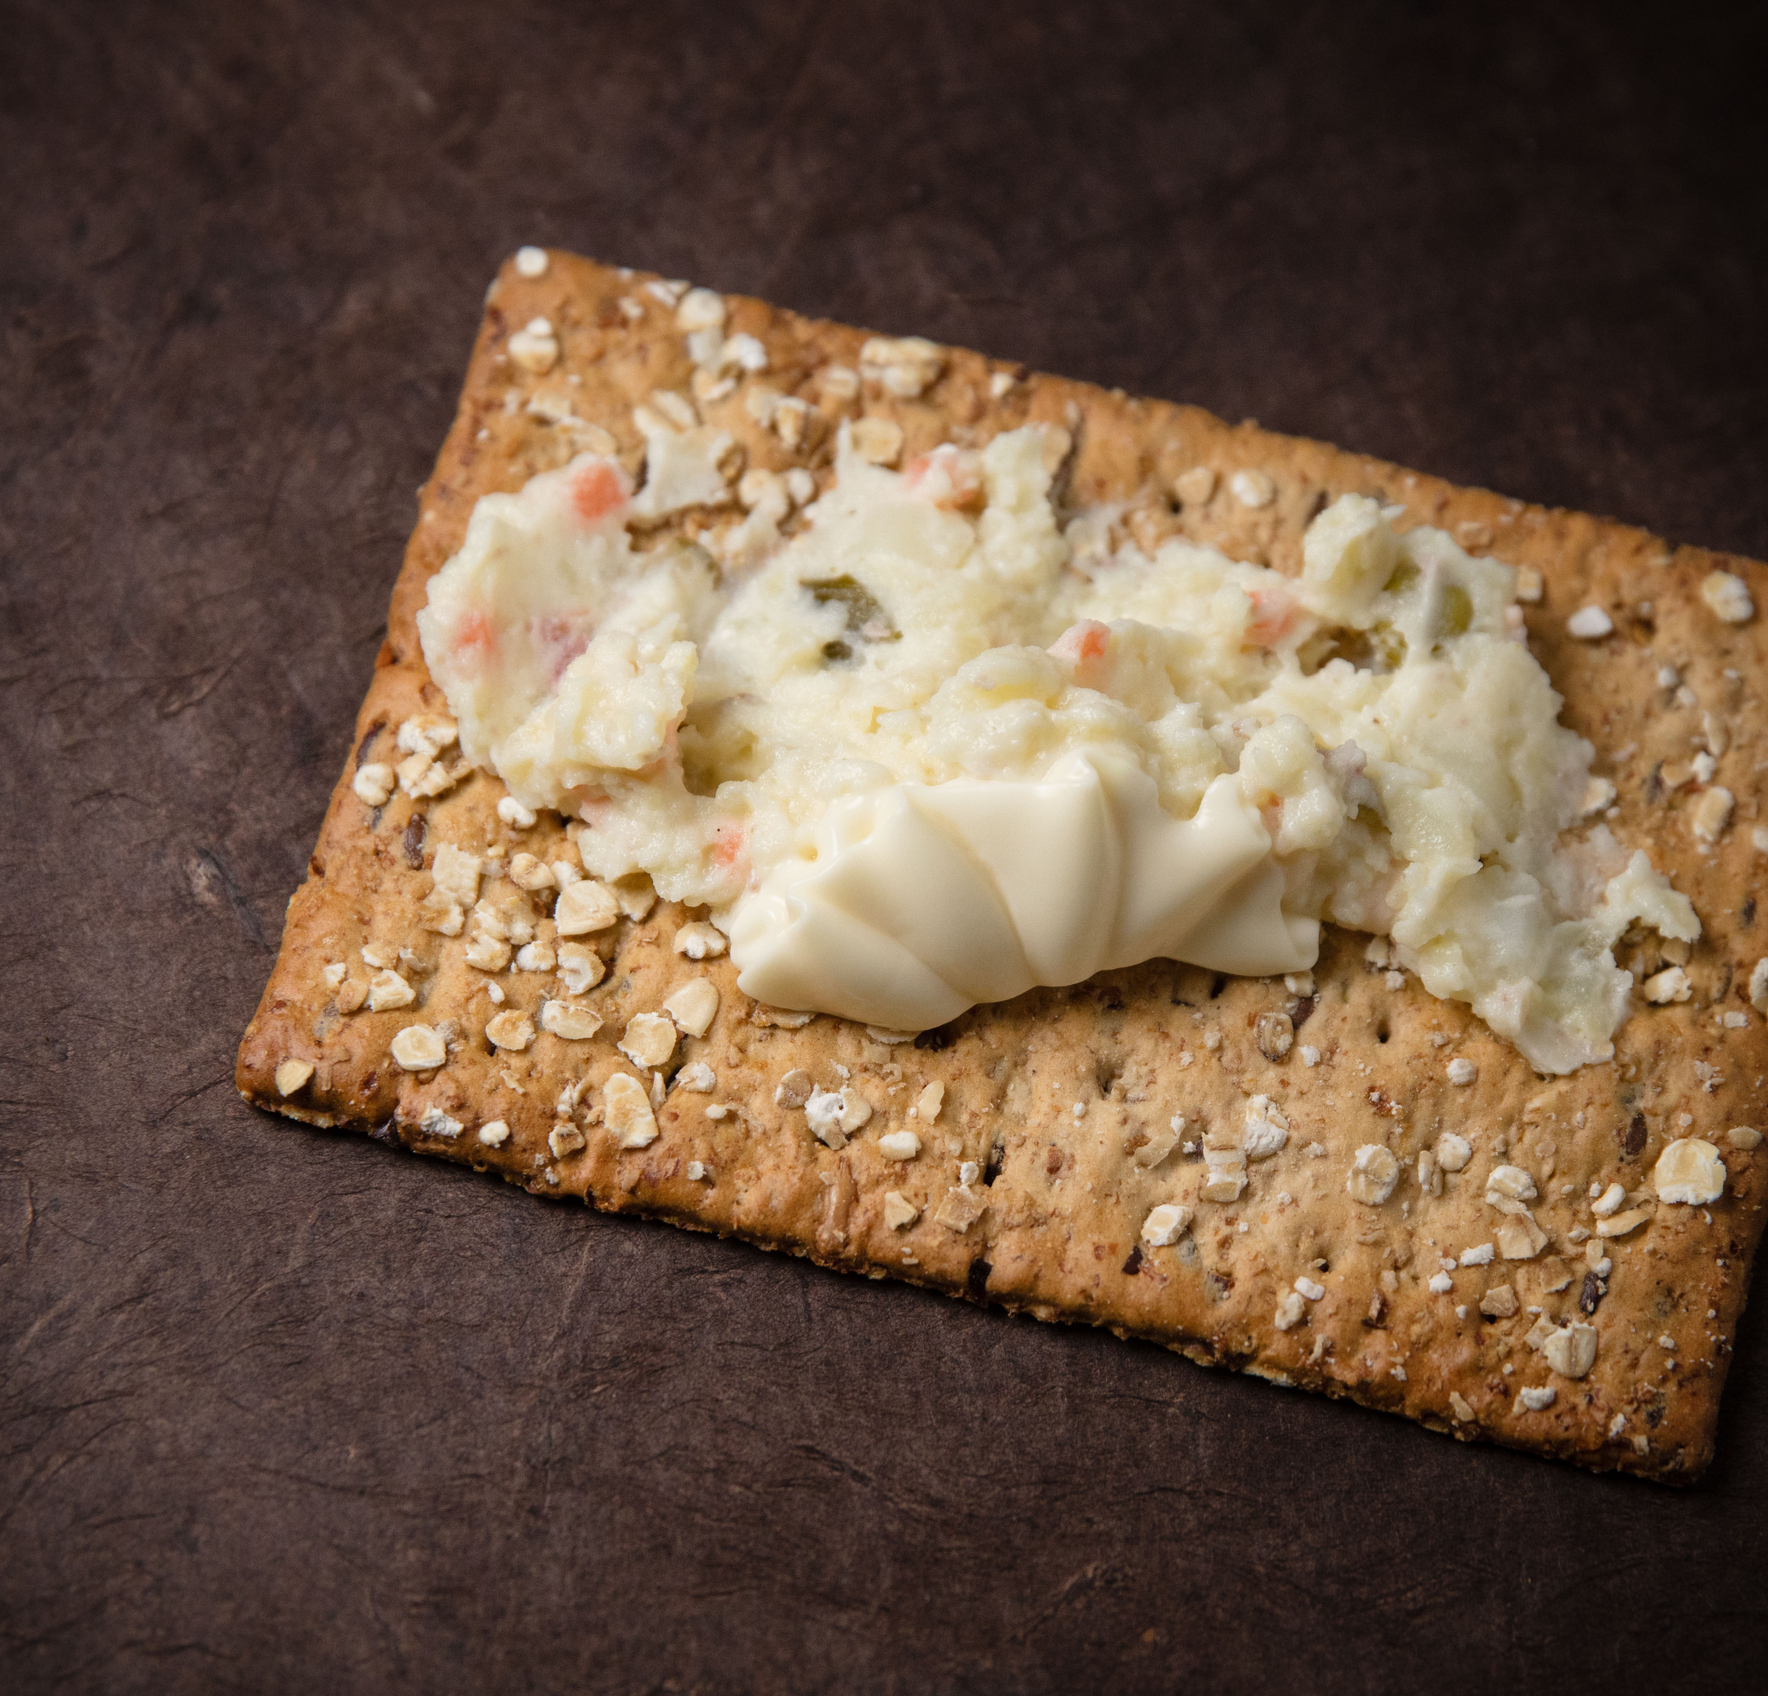 Cracker with Russian salad.